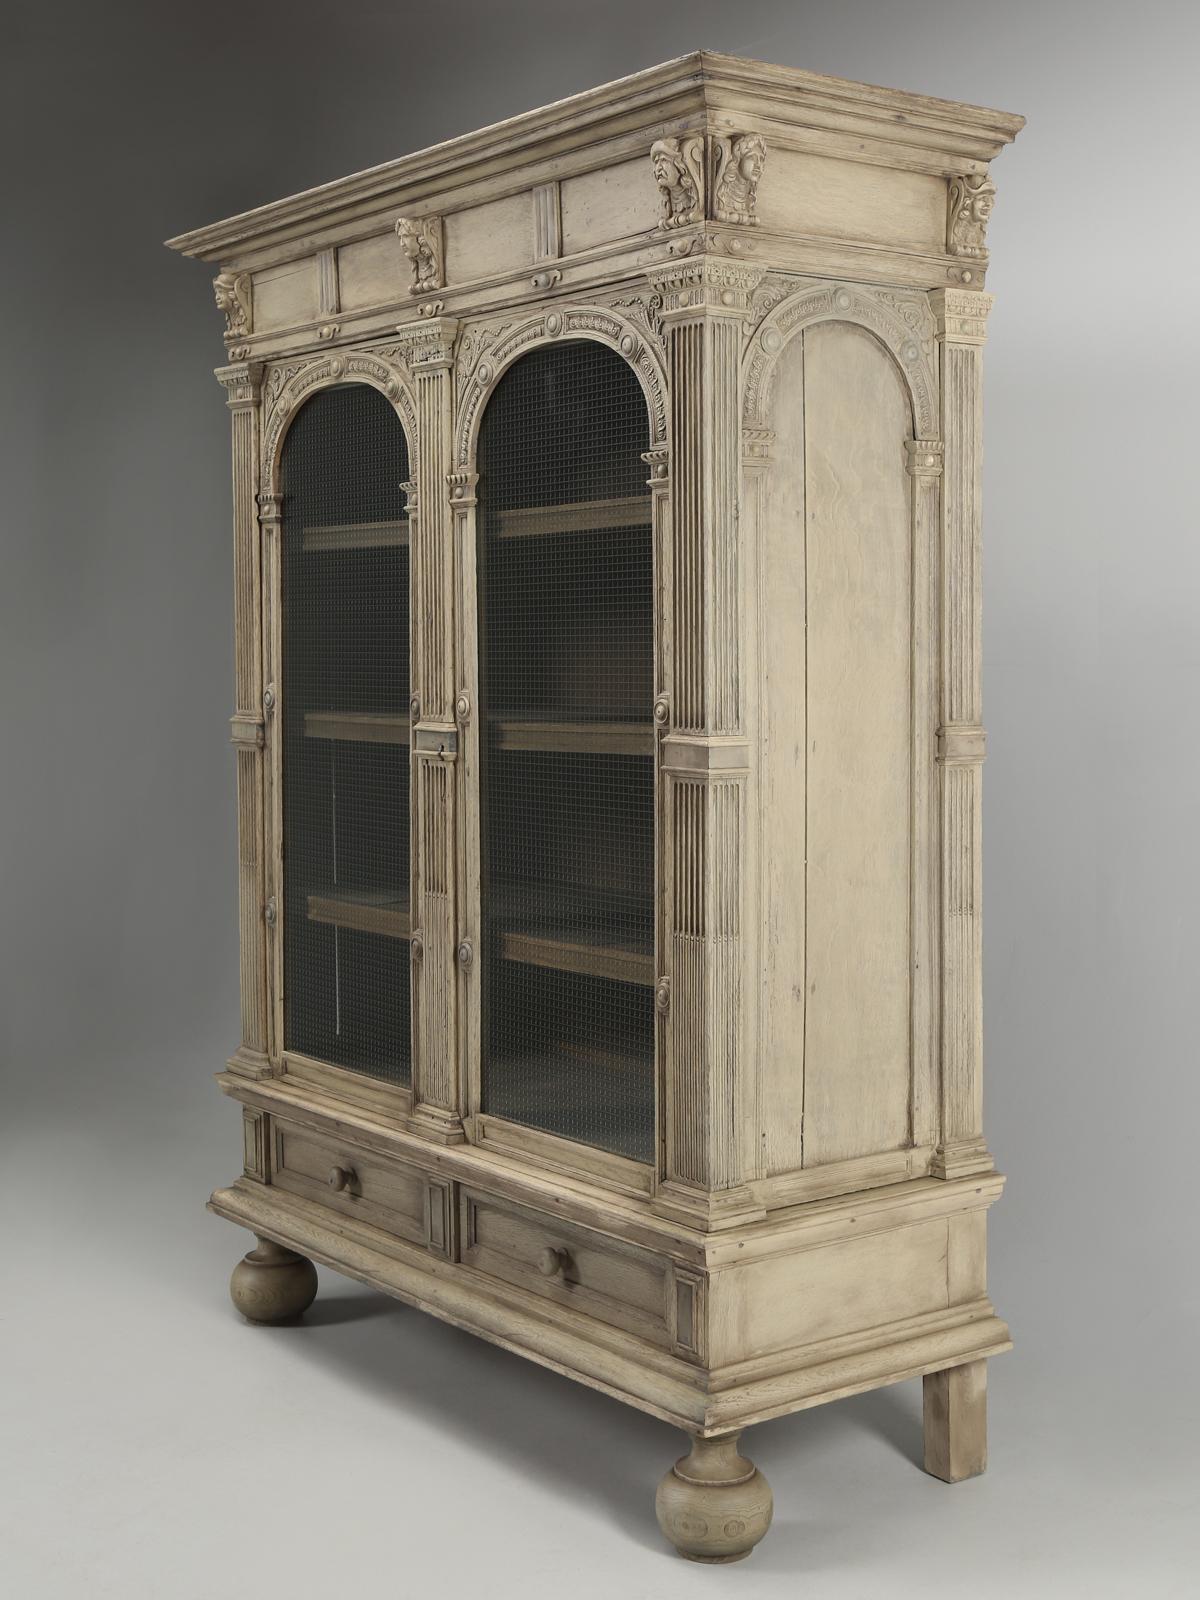 This incredibly imposing antique cabinet is not the norm for us to offer here at Old Plank, however, there was just something about the scale and the oversize proportions that drew our attention. The more we looked at the antique armoire or